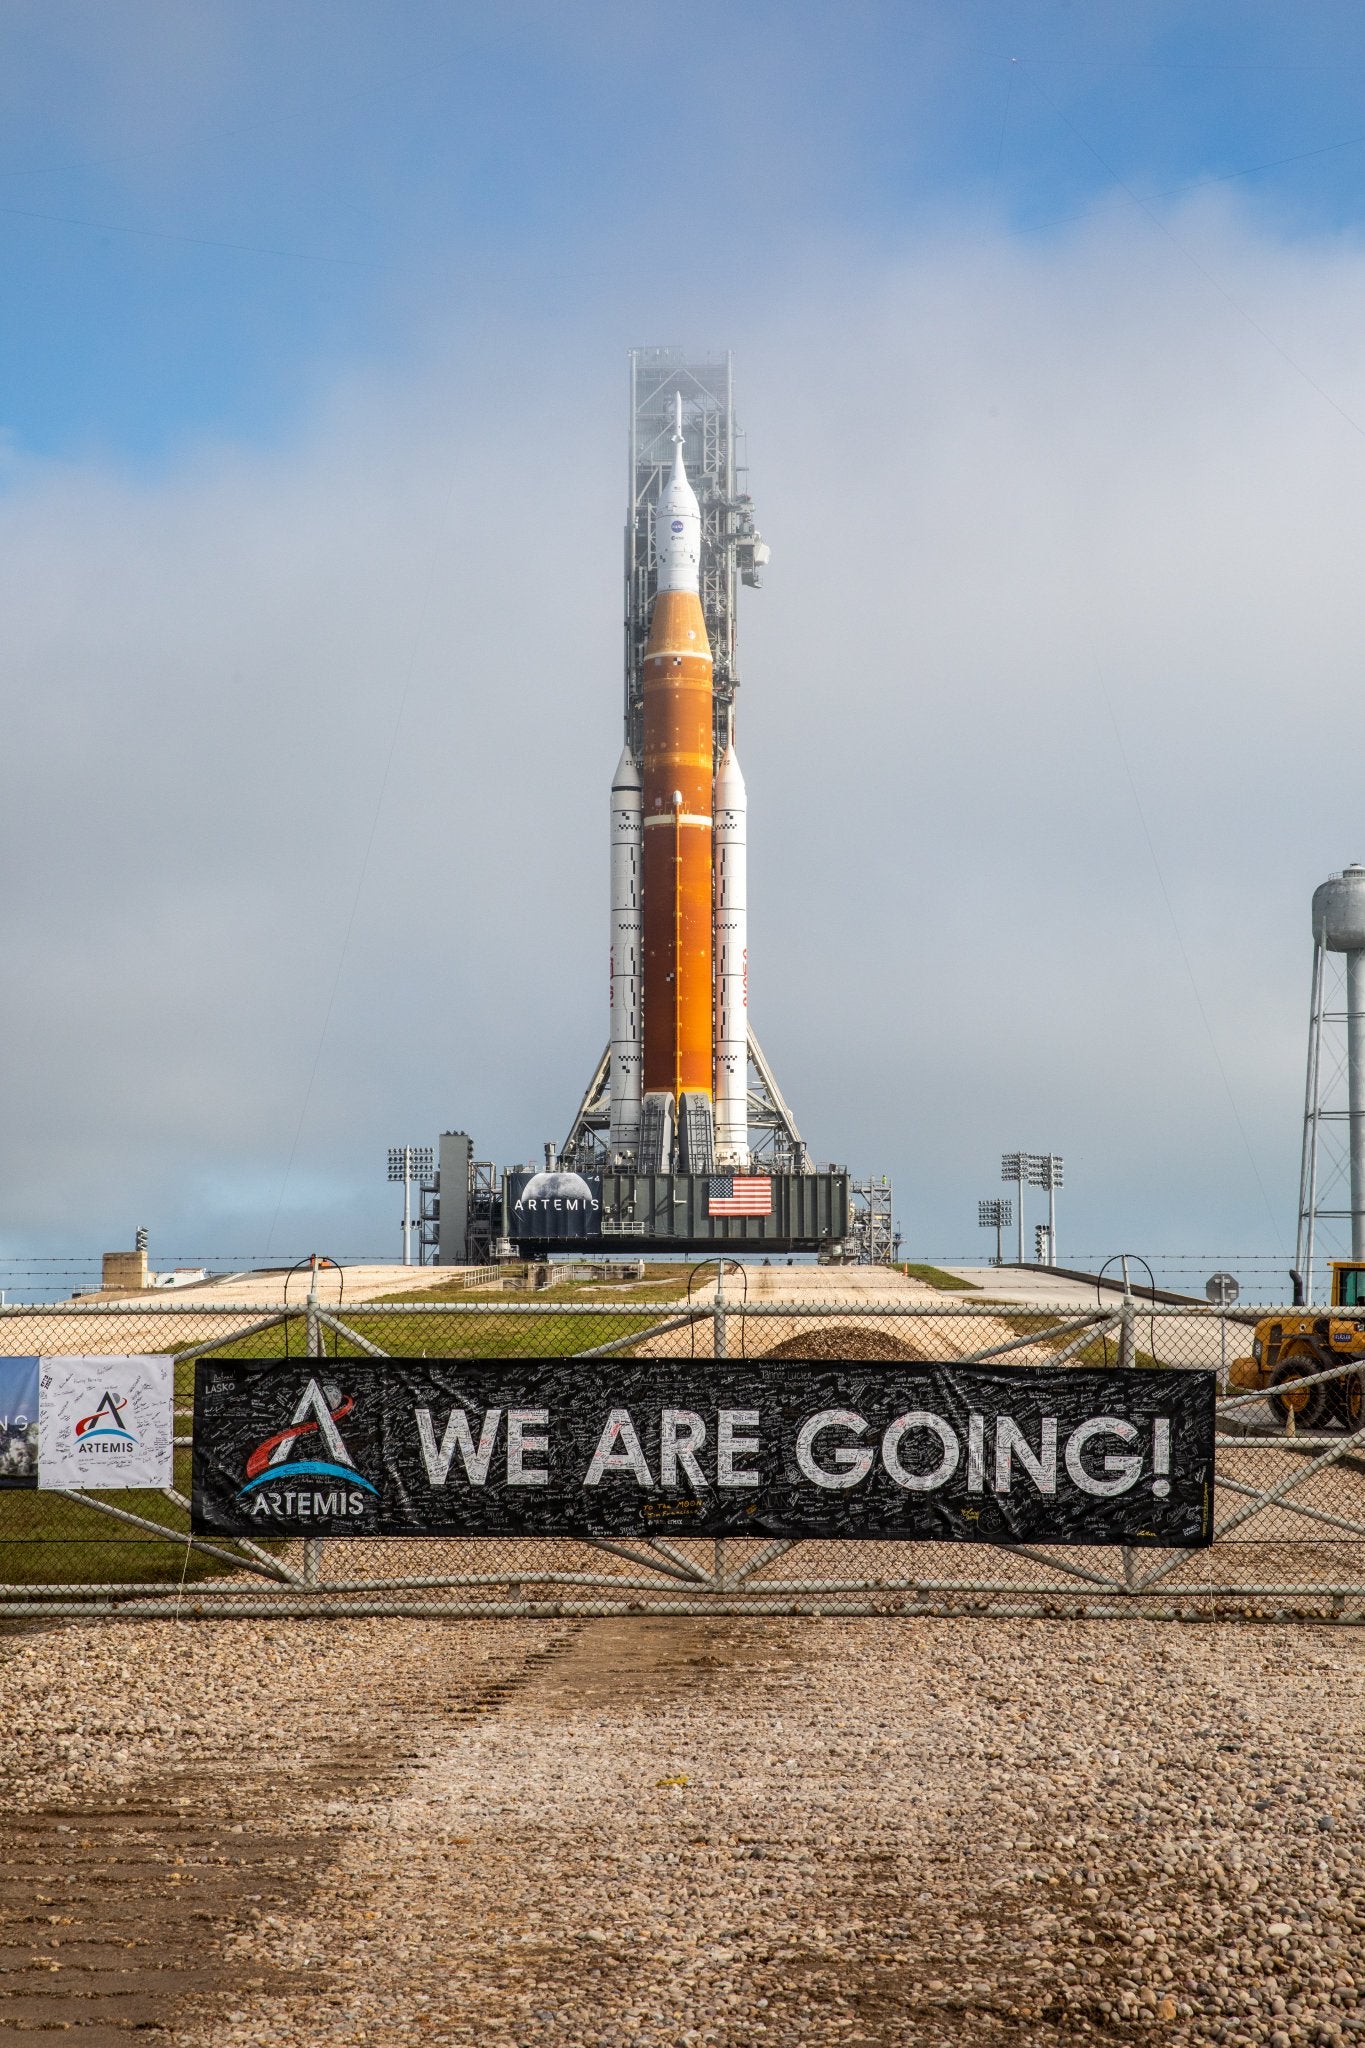 NASA Declares Megarocket Rehearsal Complete, Setting Stage for Inaugural Launch